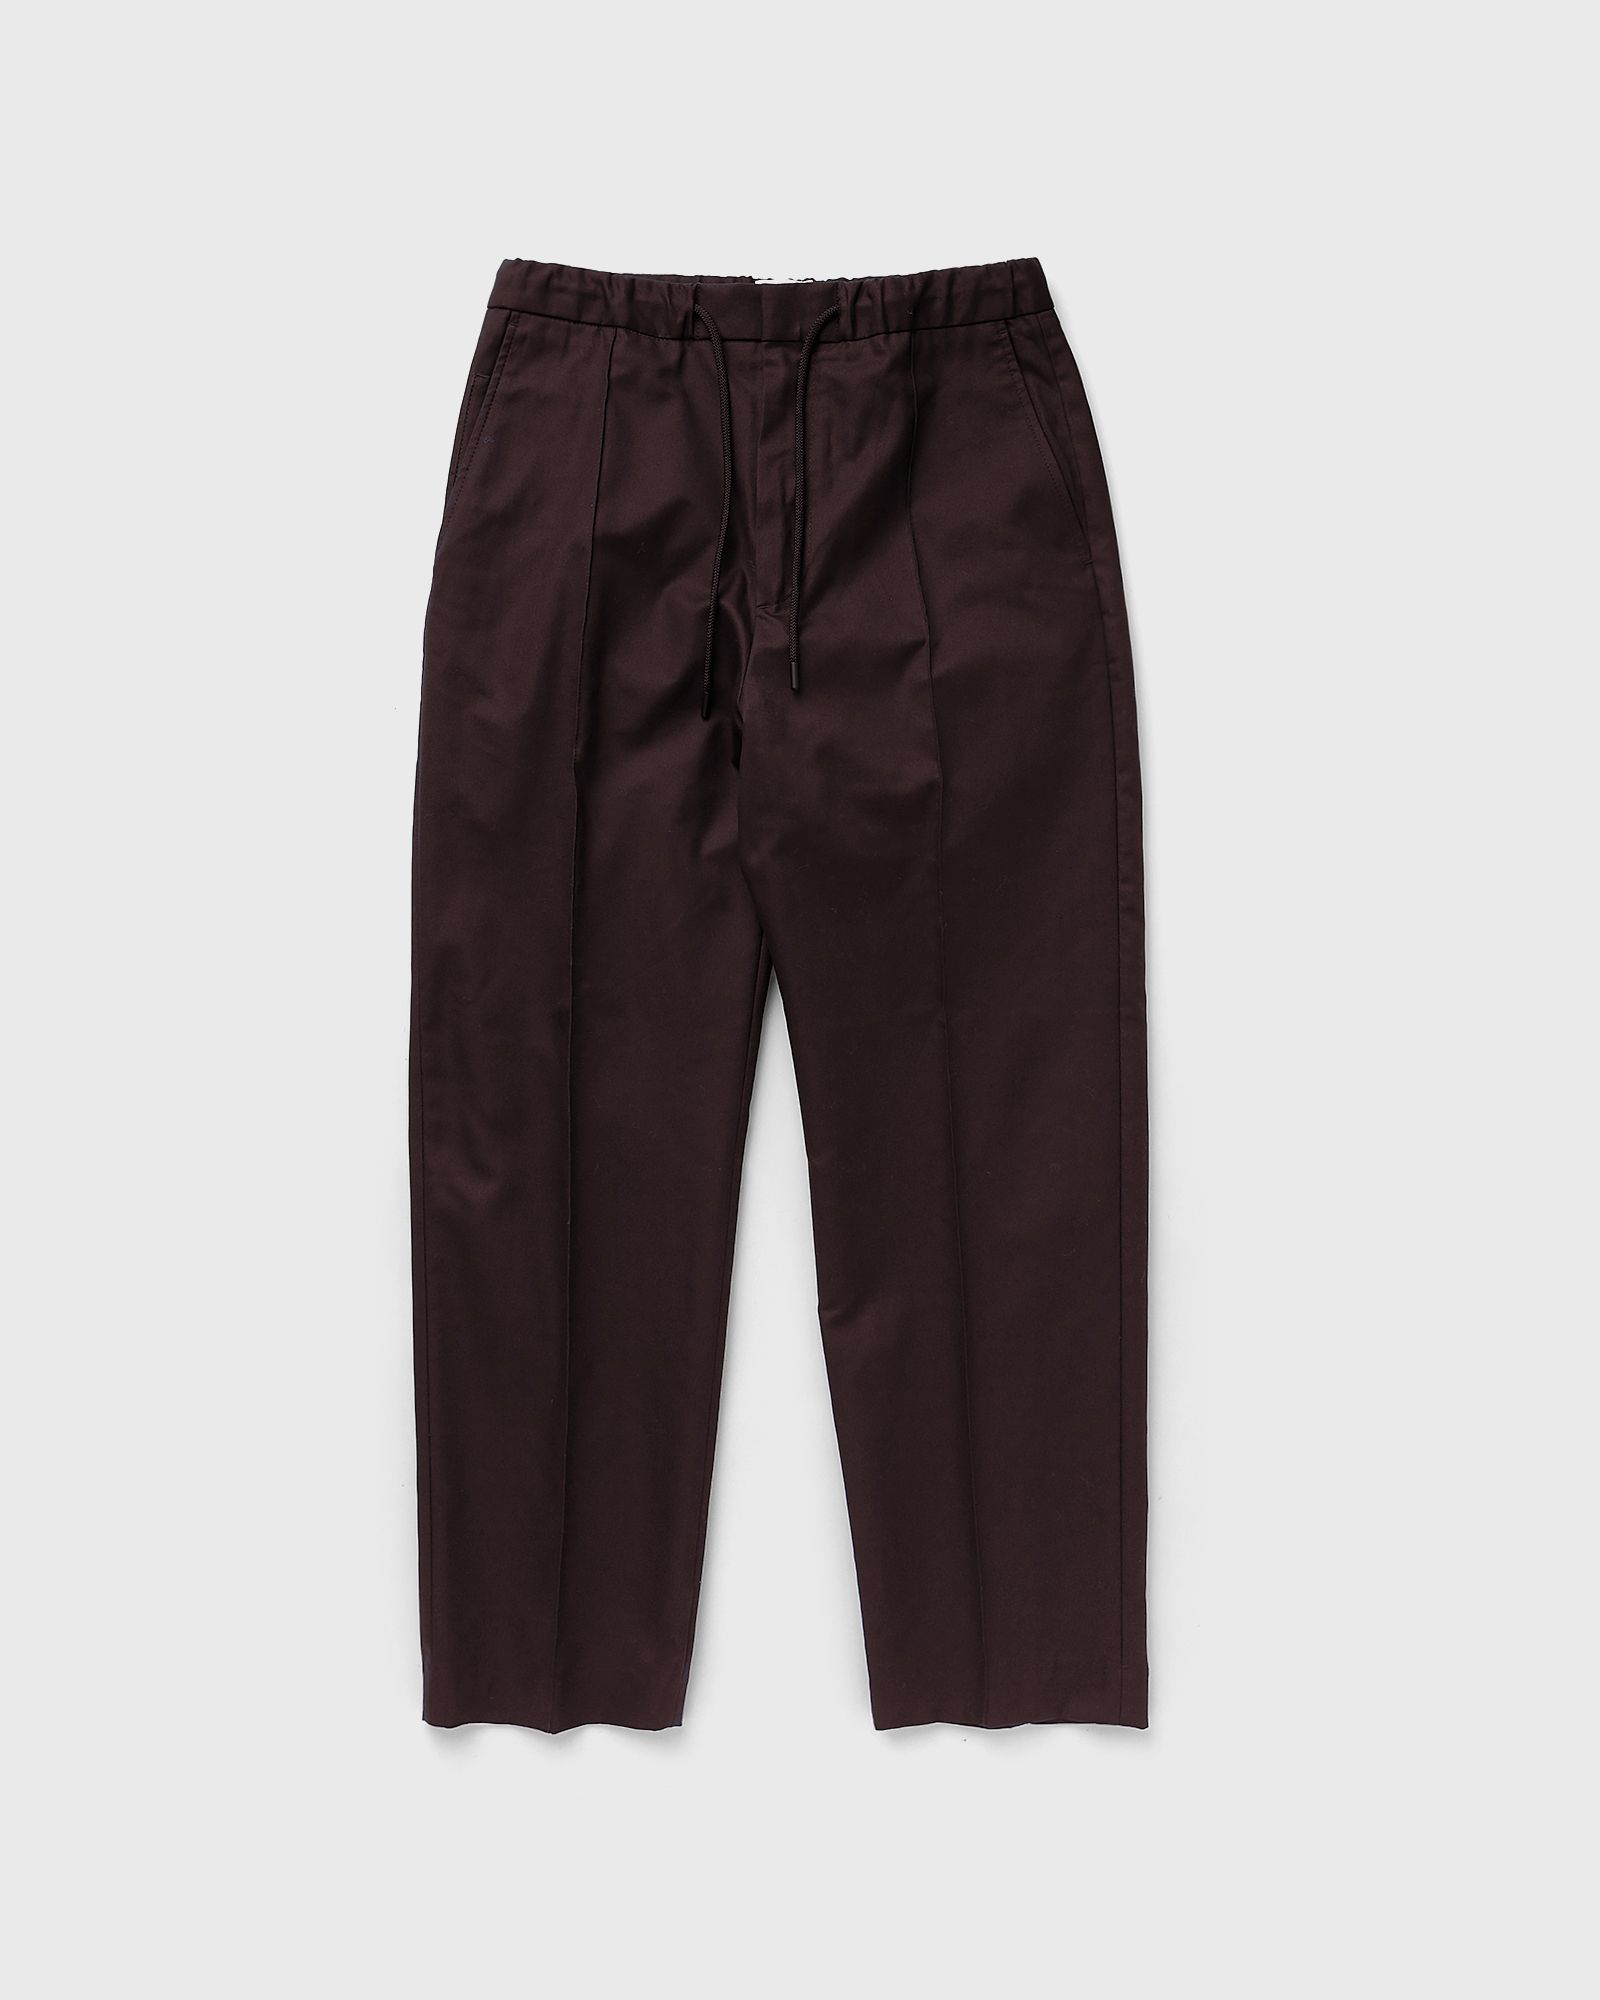 CLOSED - nanaimo straight men casual pants brown in größe:m